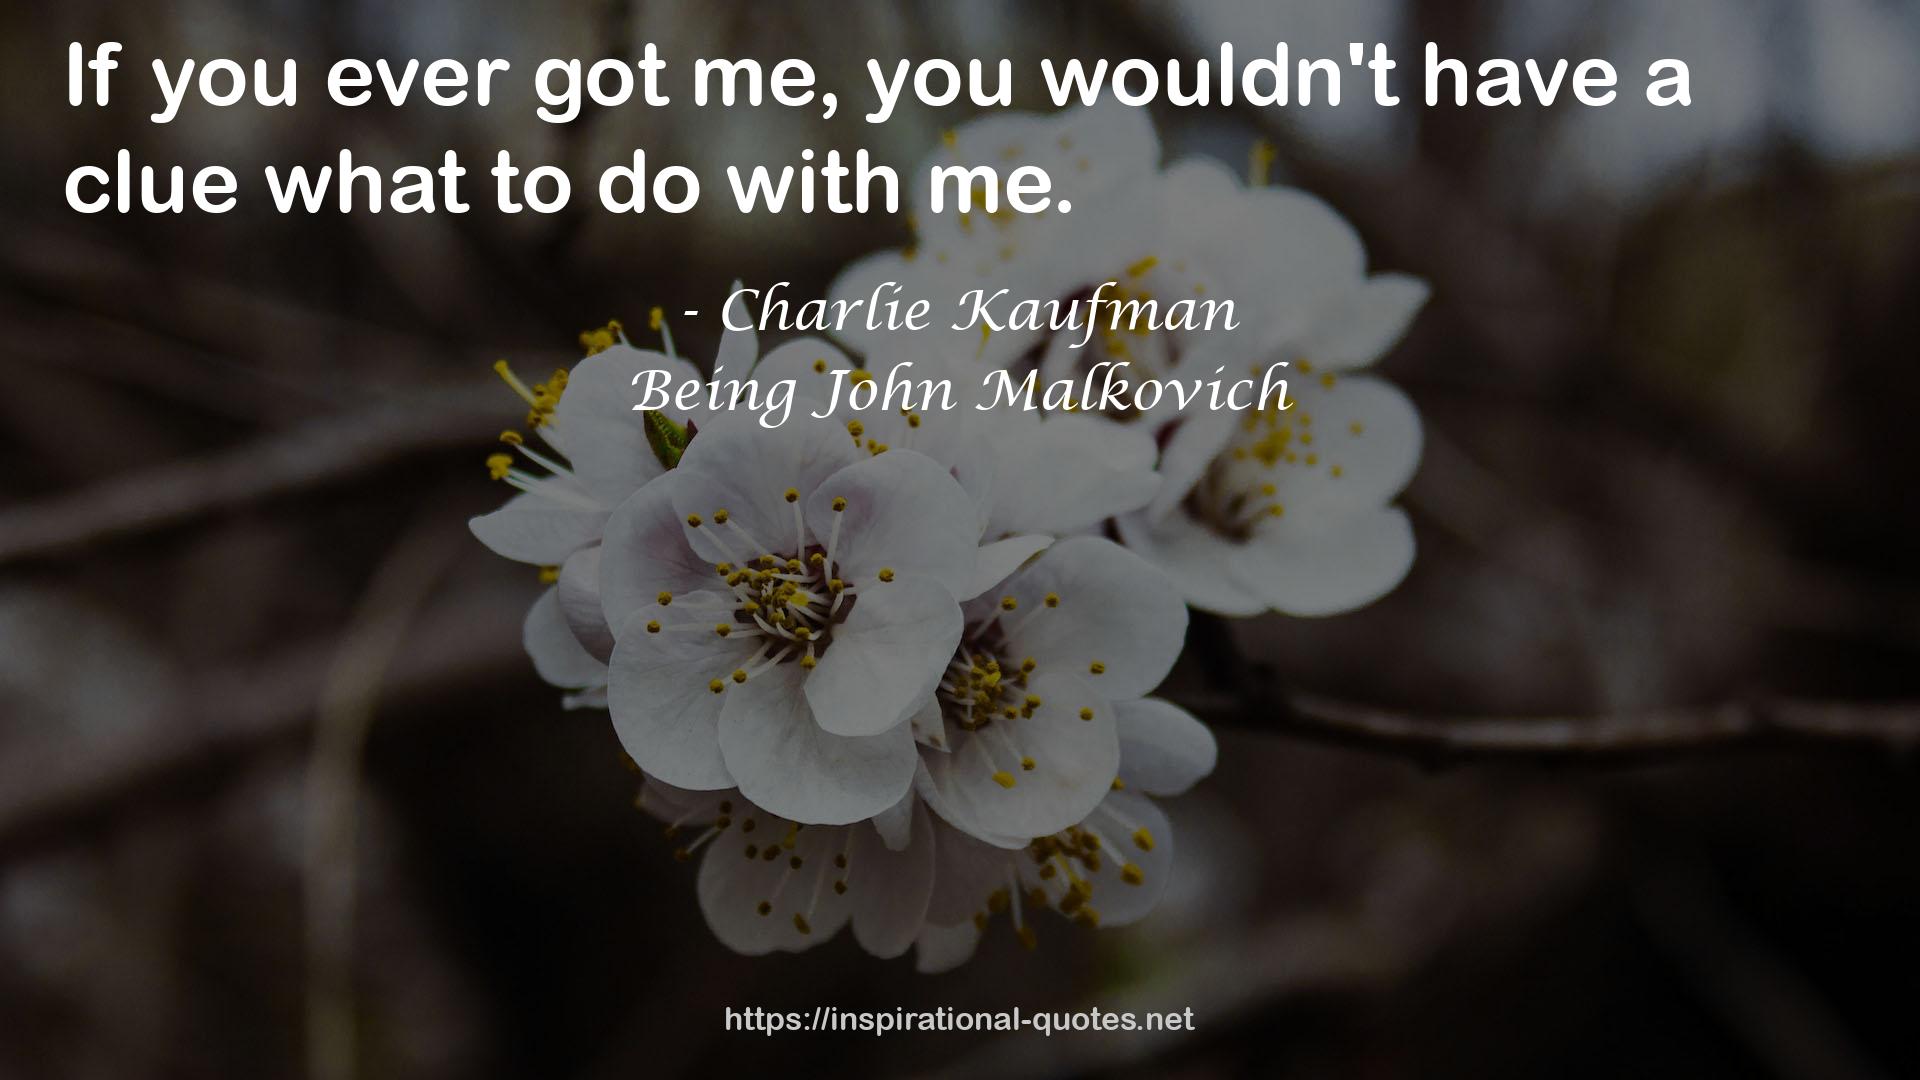 Being John Malkovich QUOTES